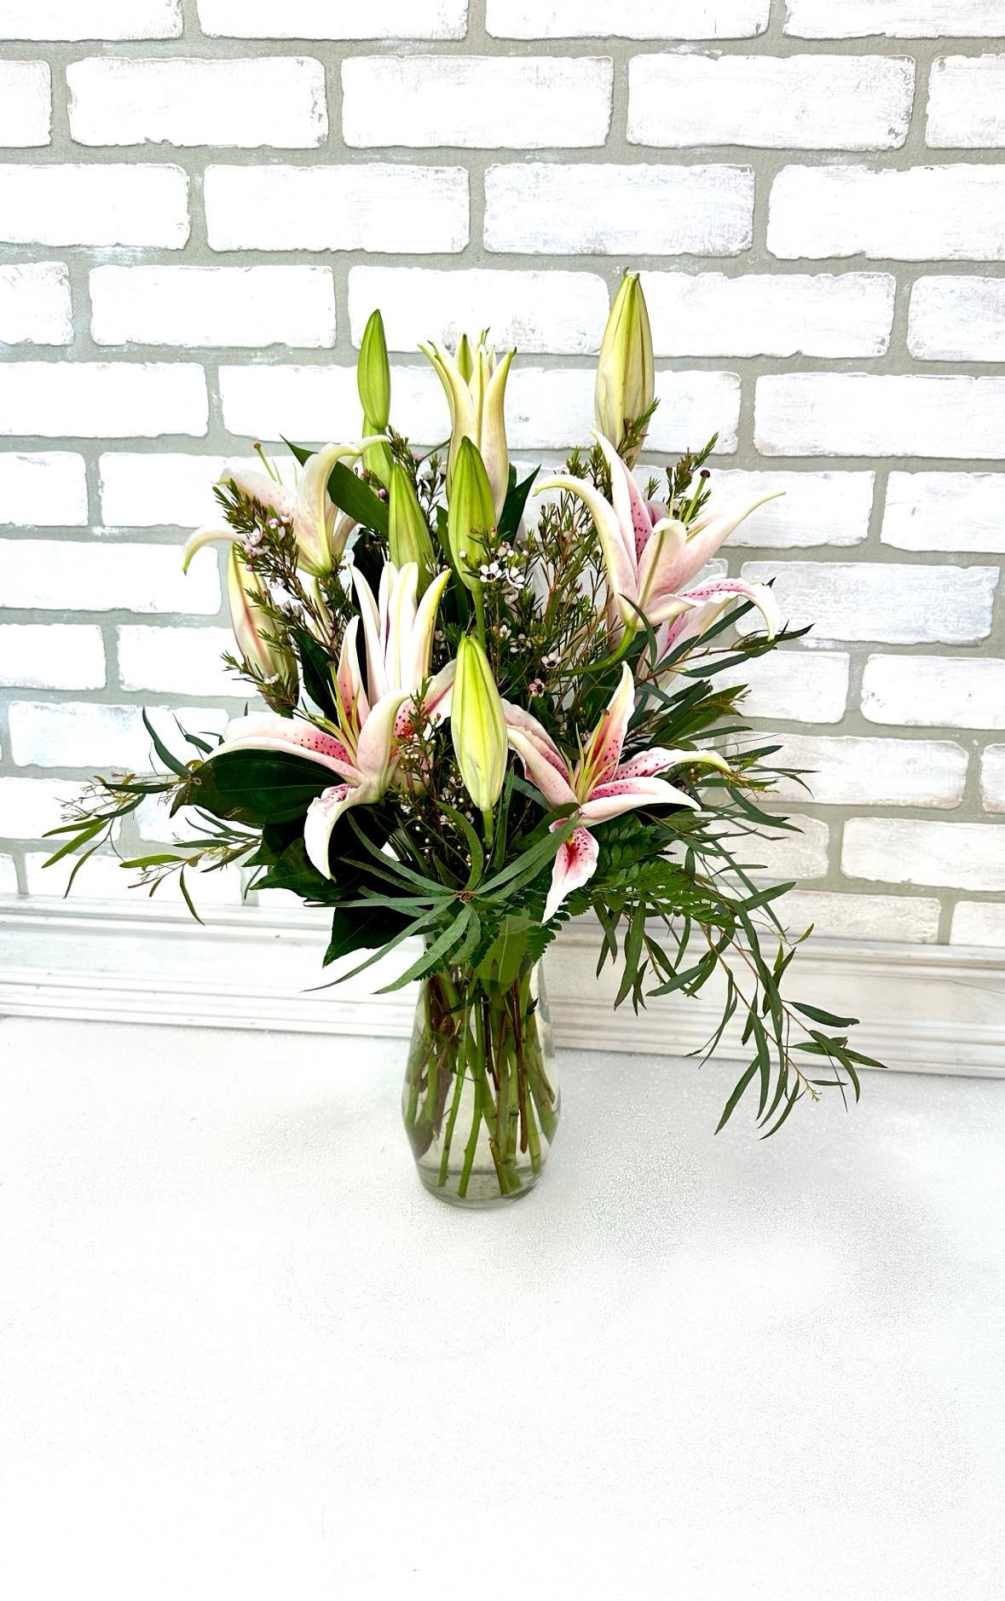 Gathering vase filled with Stargazer lilies. One of our most popular items!